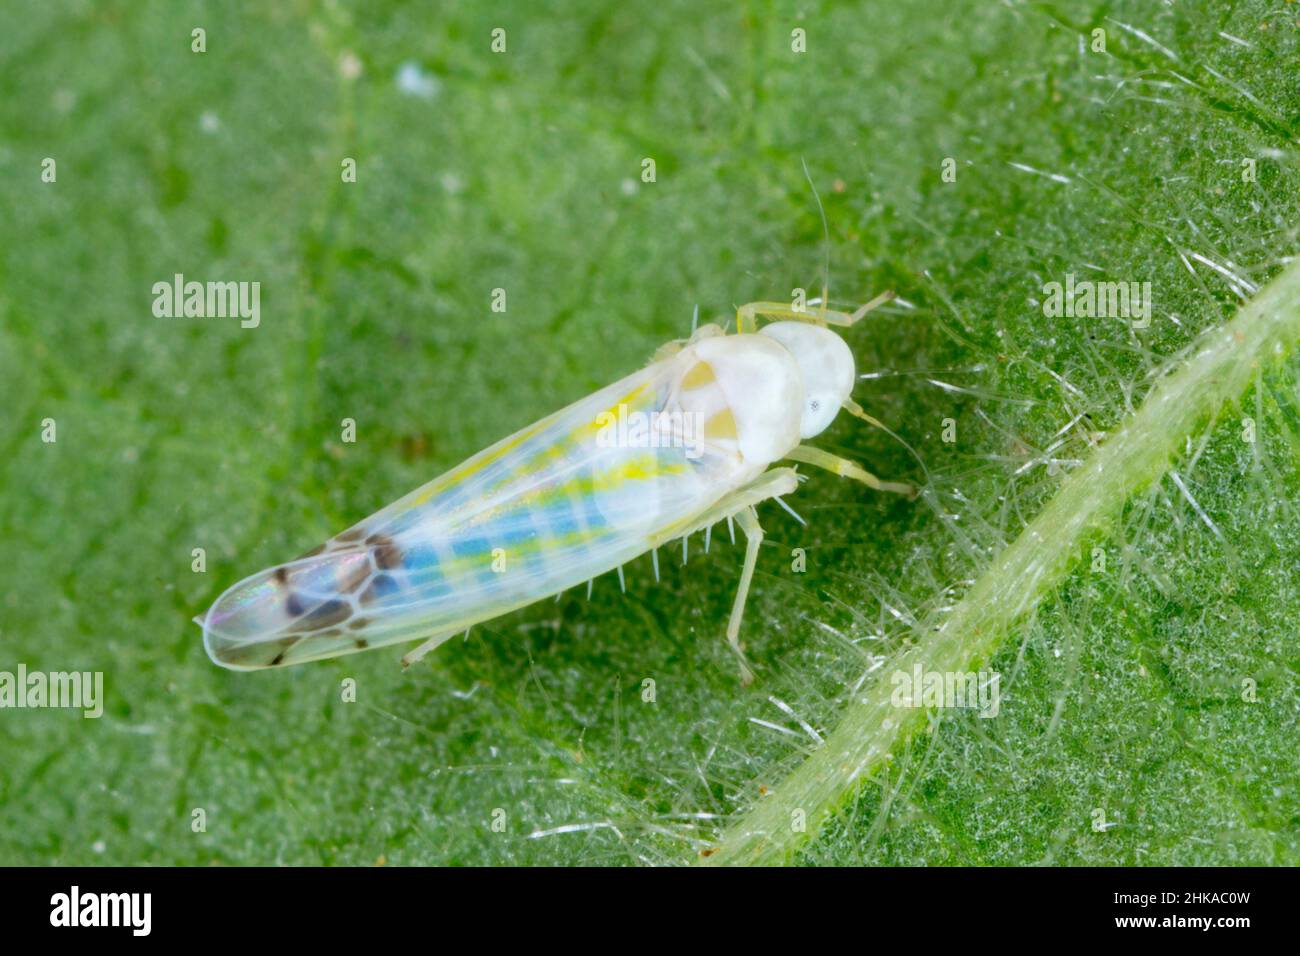 Ribautiana tenerrima leafhopper (Cicadellidae) a pest of cultivated blackberries including thornless blackberry. Stock Photo